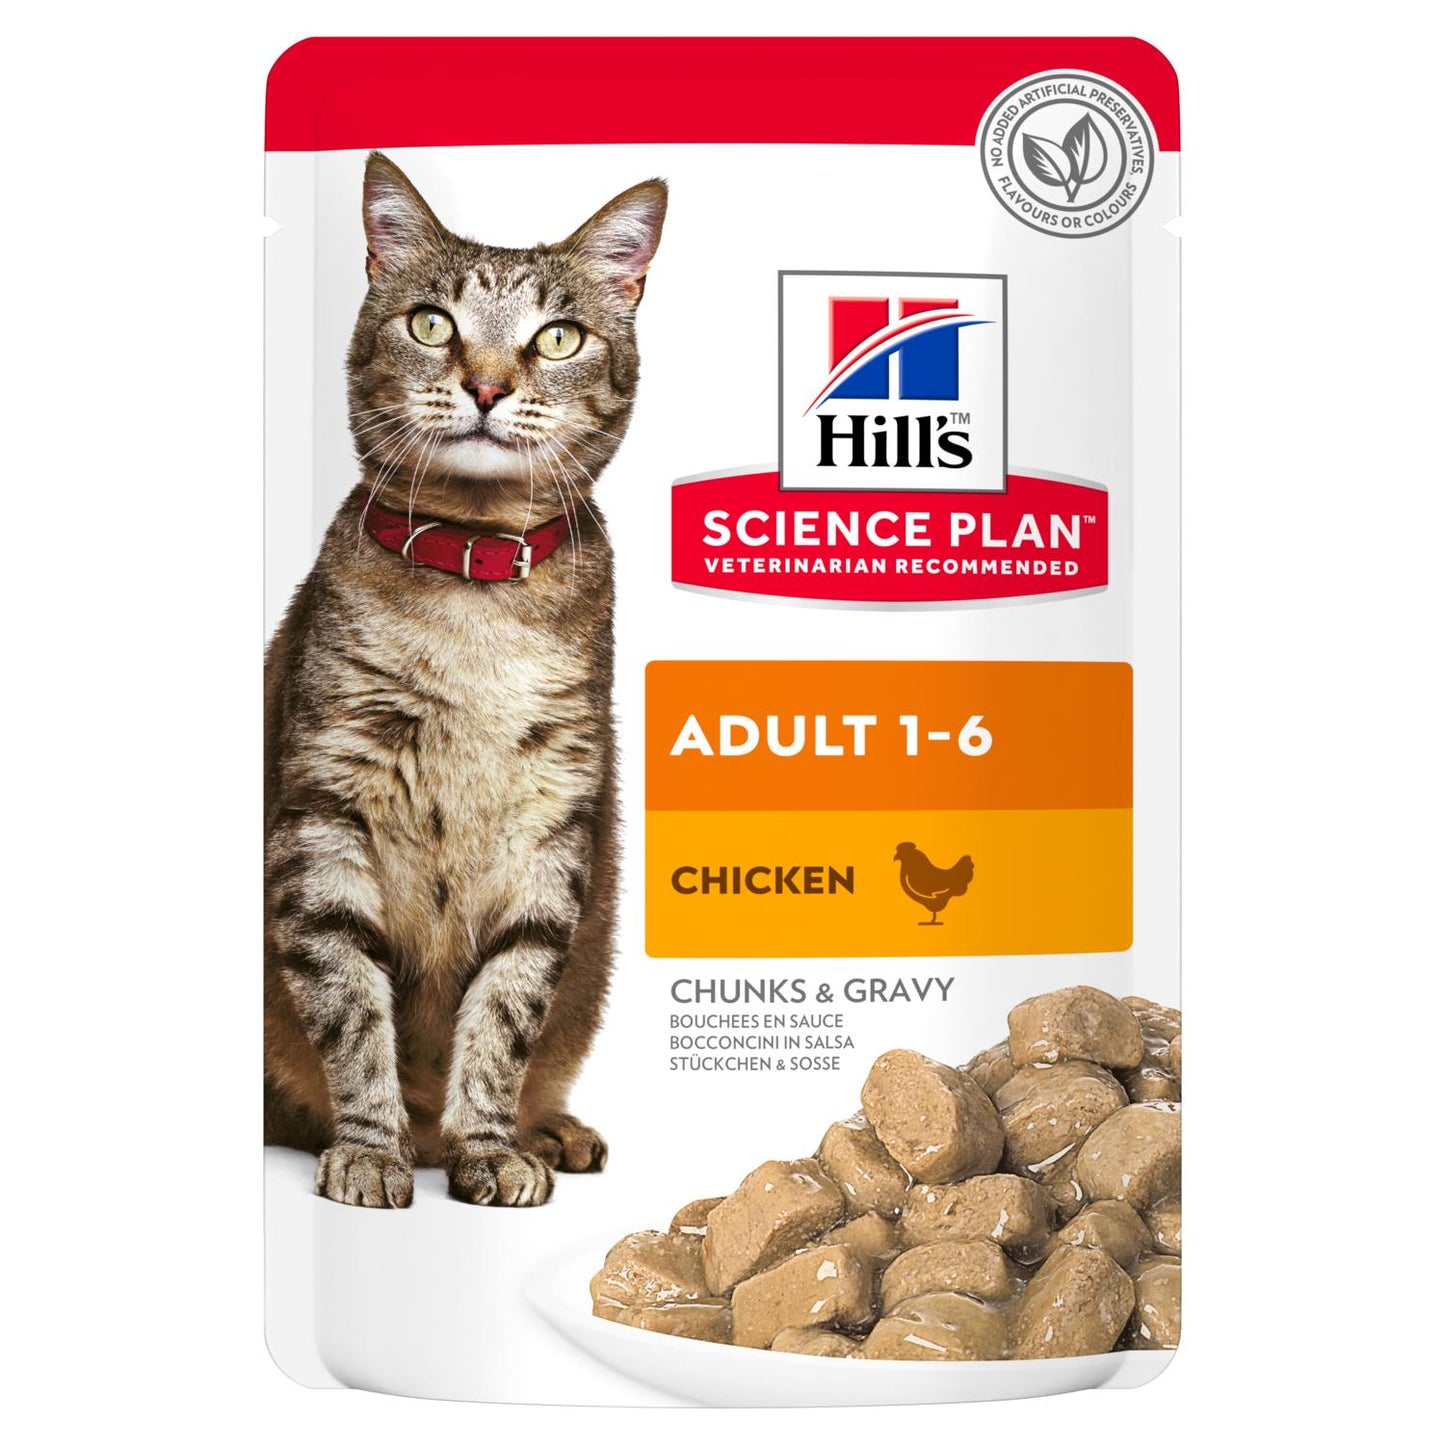 Hill's Science Plan Adult Wet Cat Food Chicken Pouch, 85g